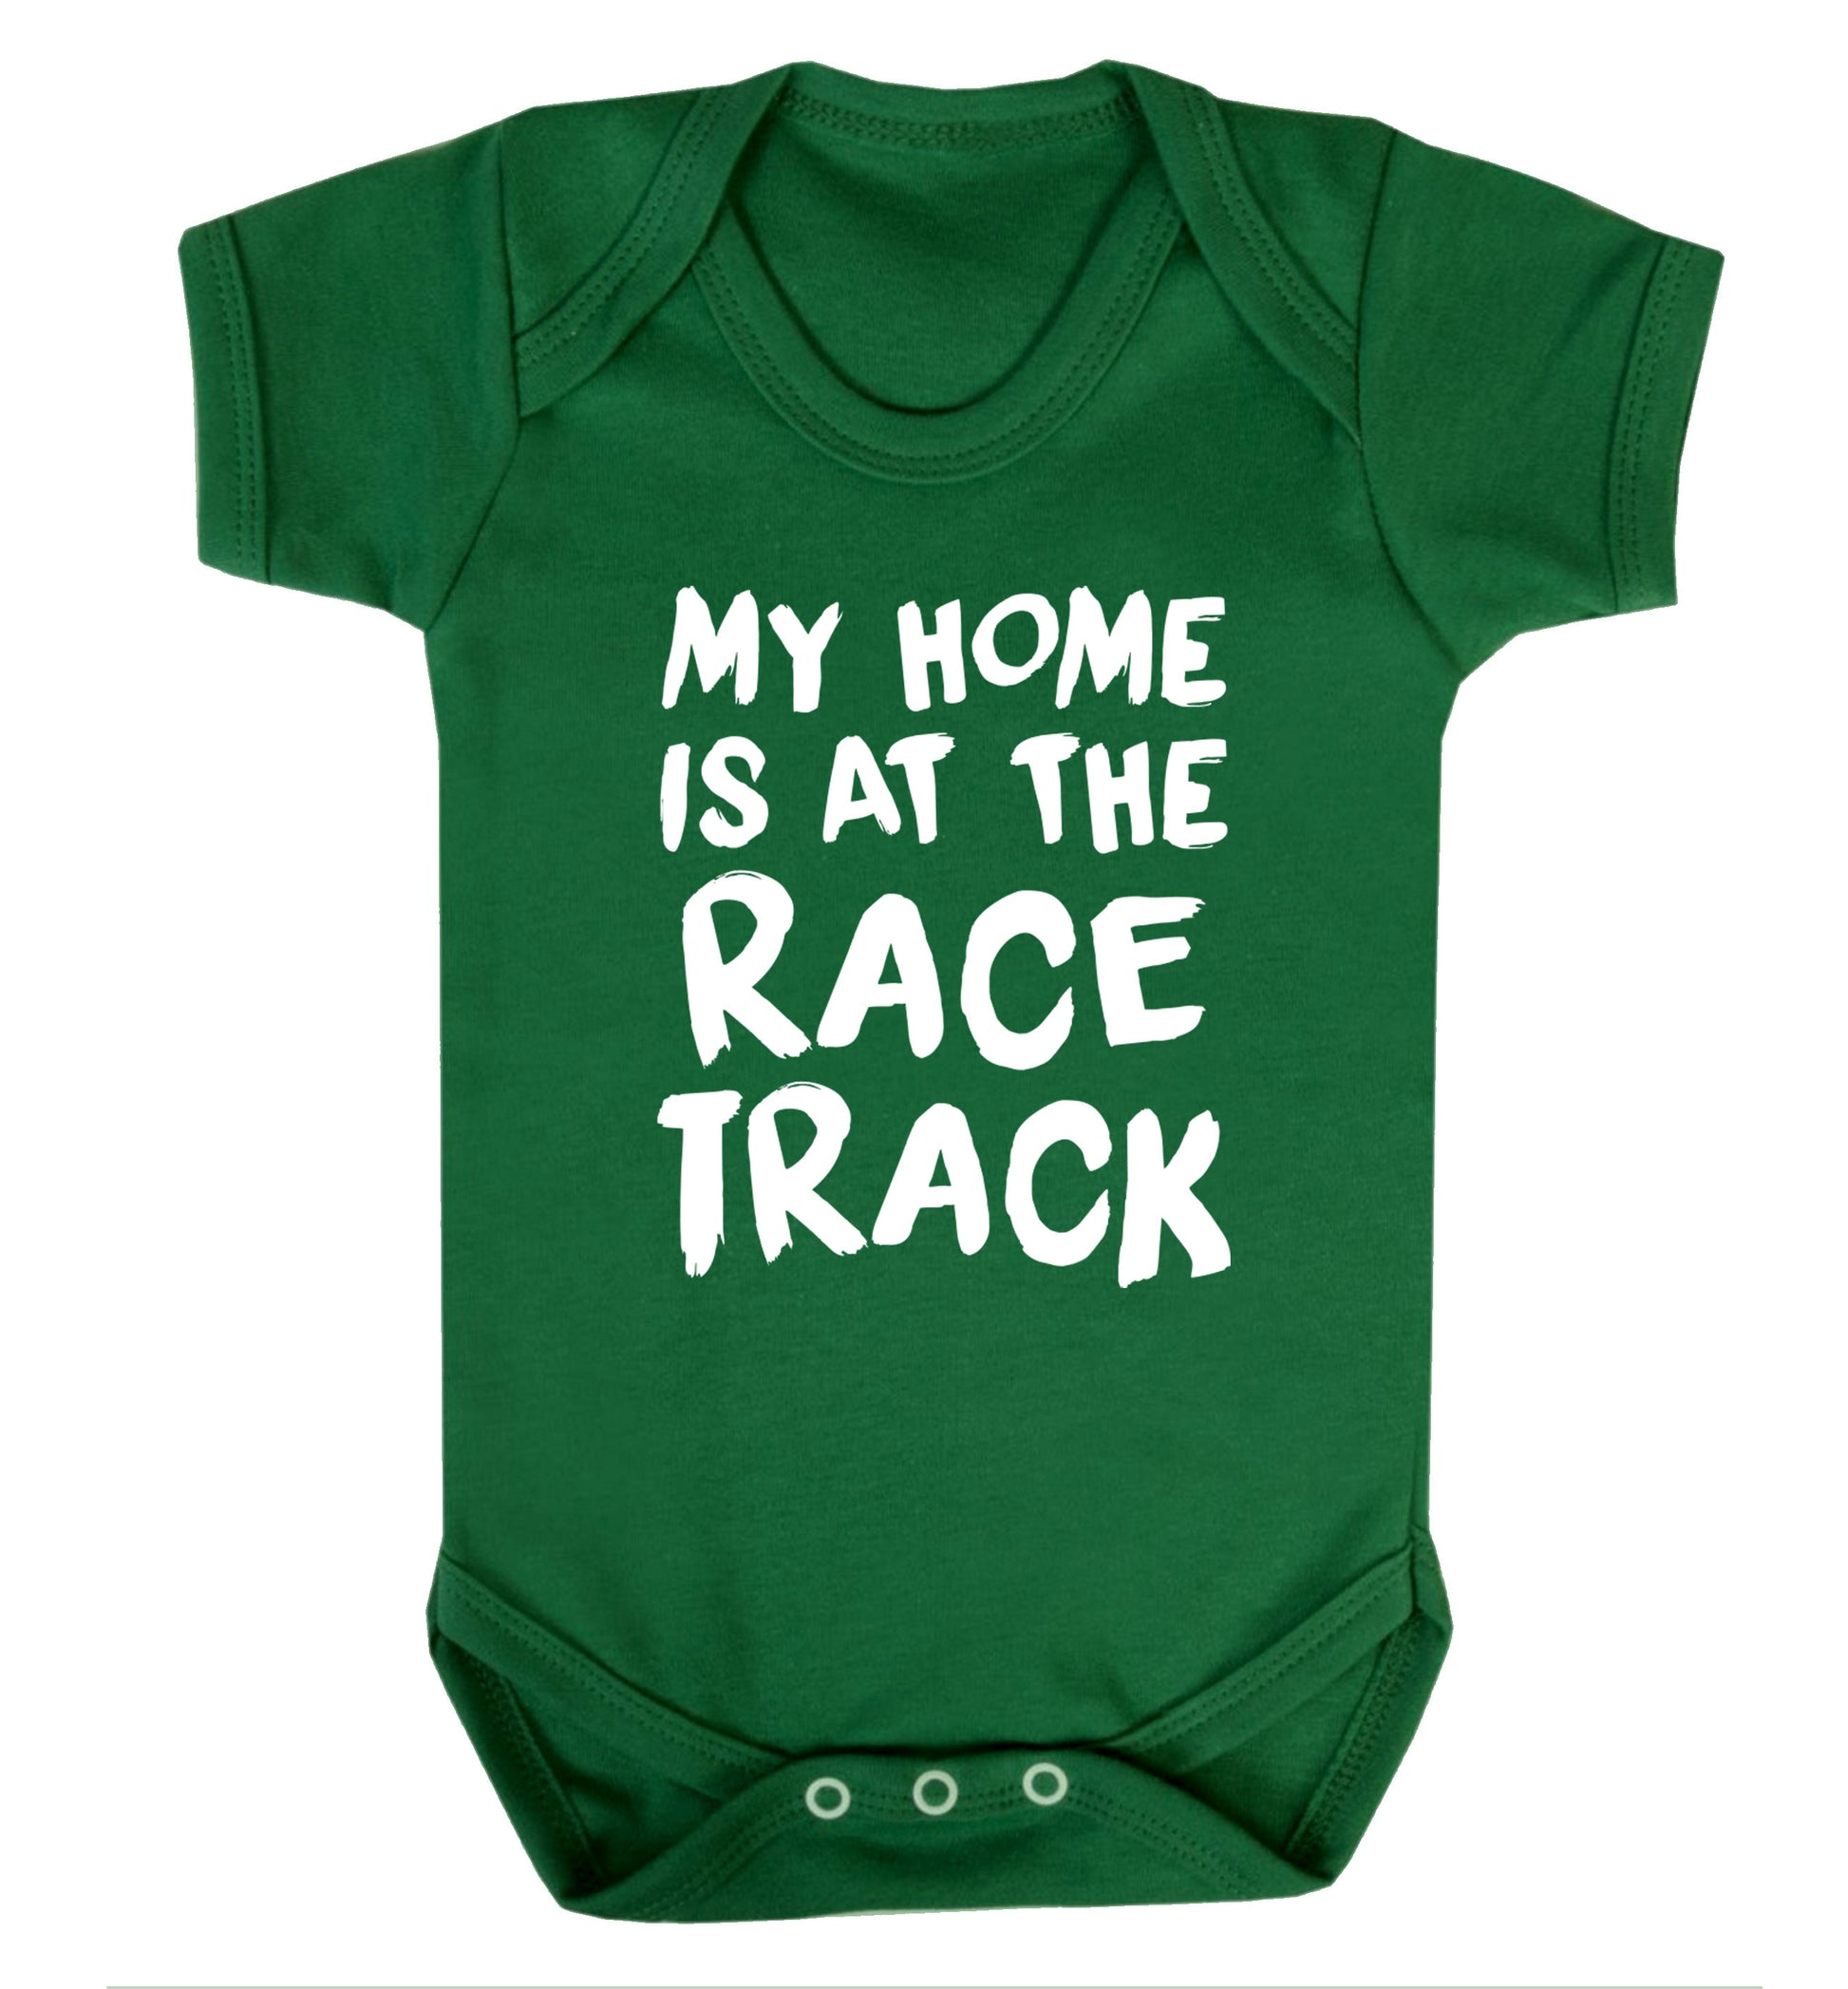 My home is at the race track Baby Vest green 18-24 months